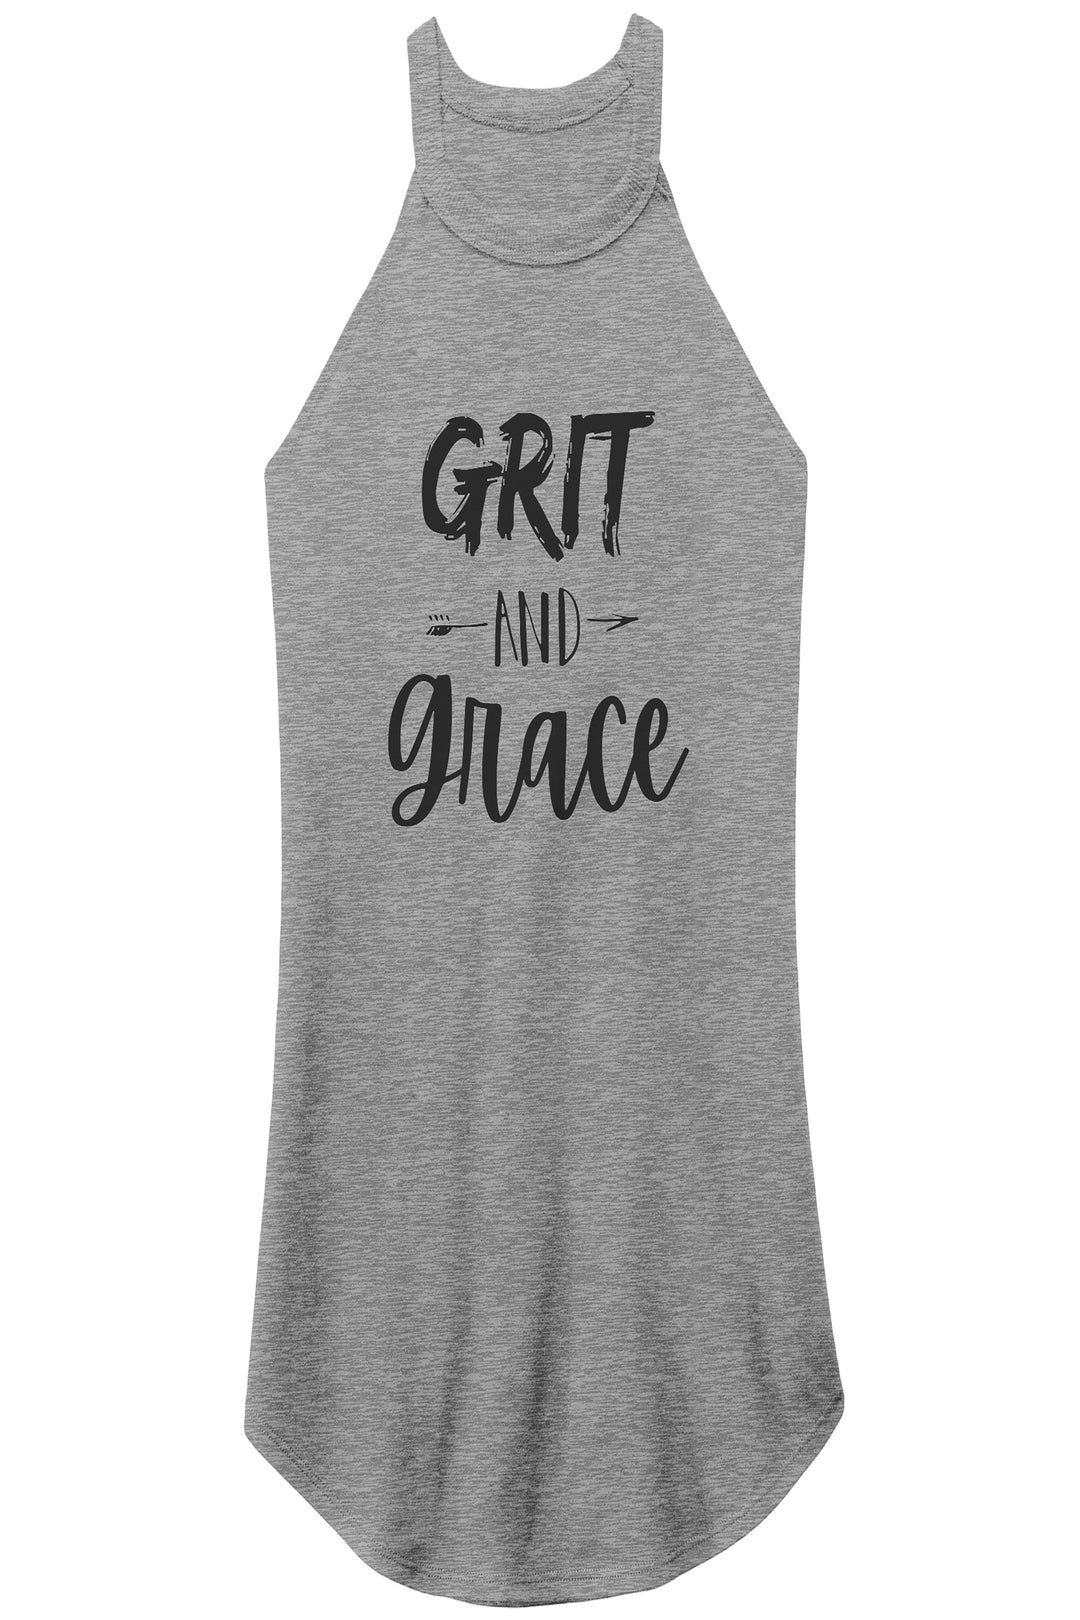 Grit And Grace Ladies Tank Top